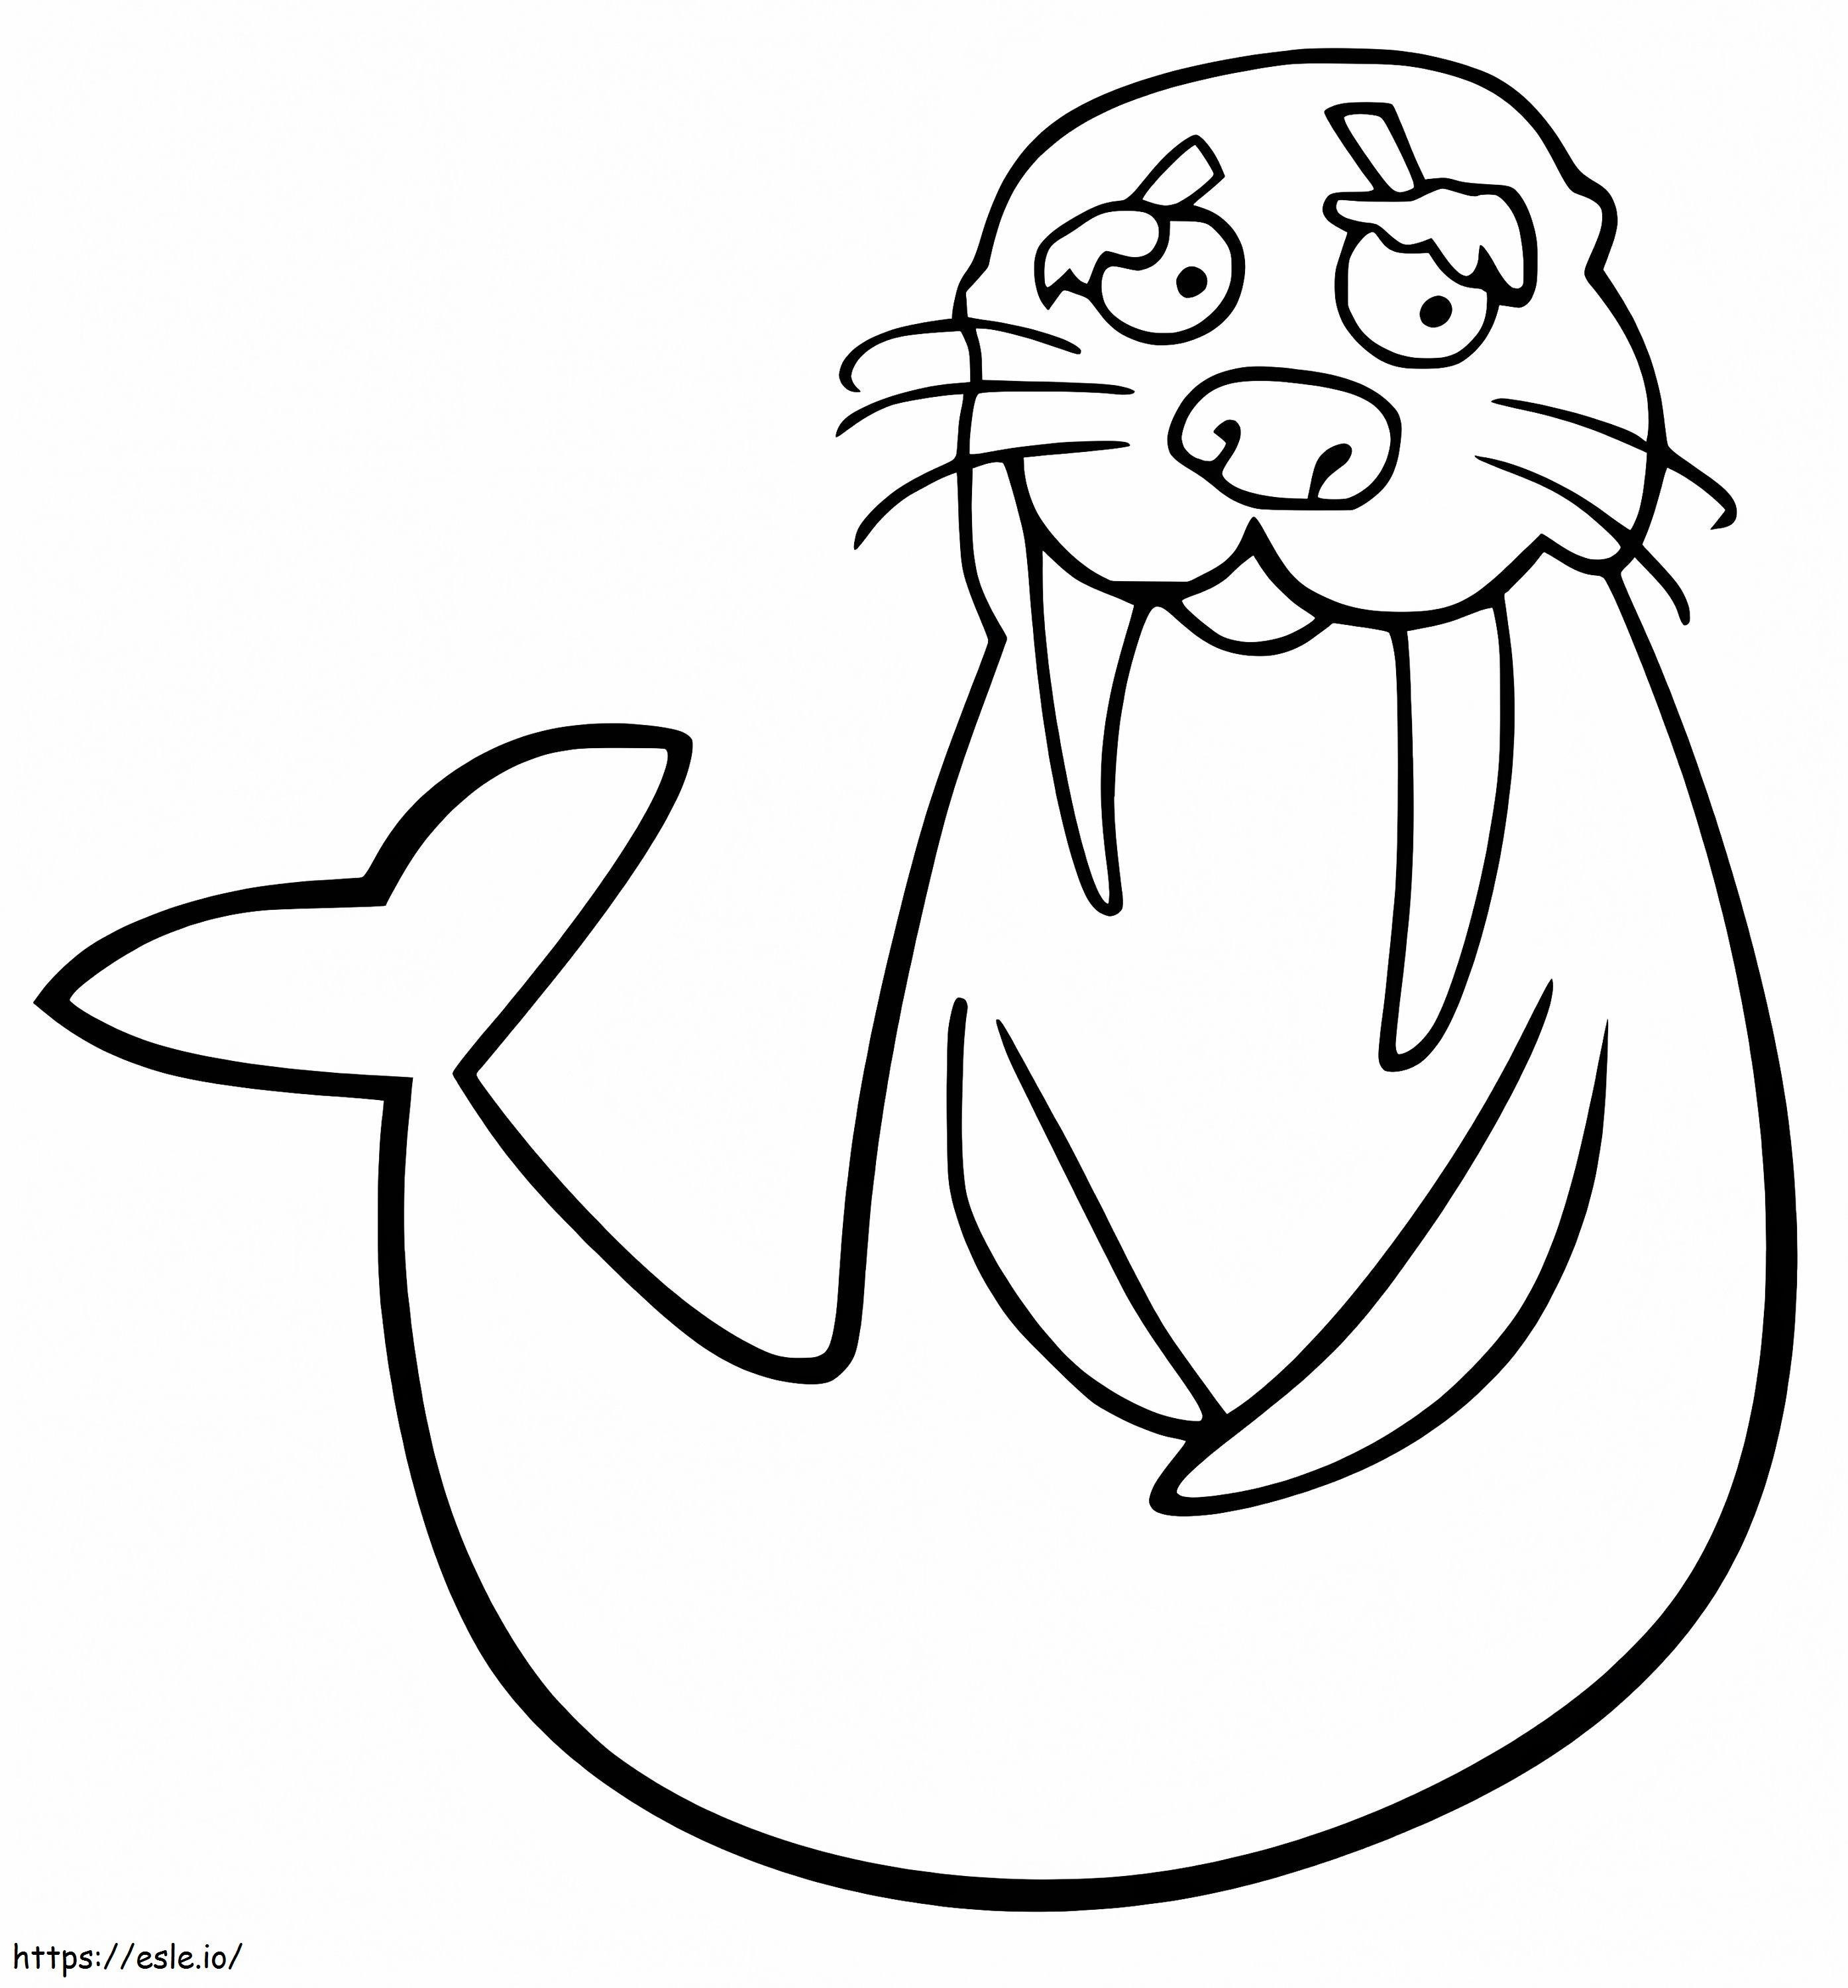 Walrus 9 coloring page